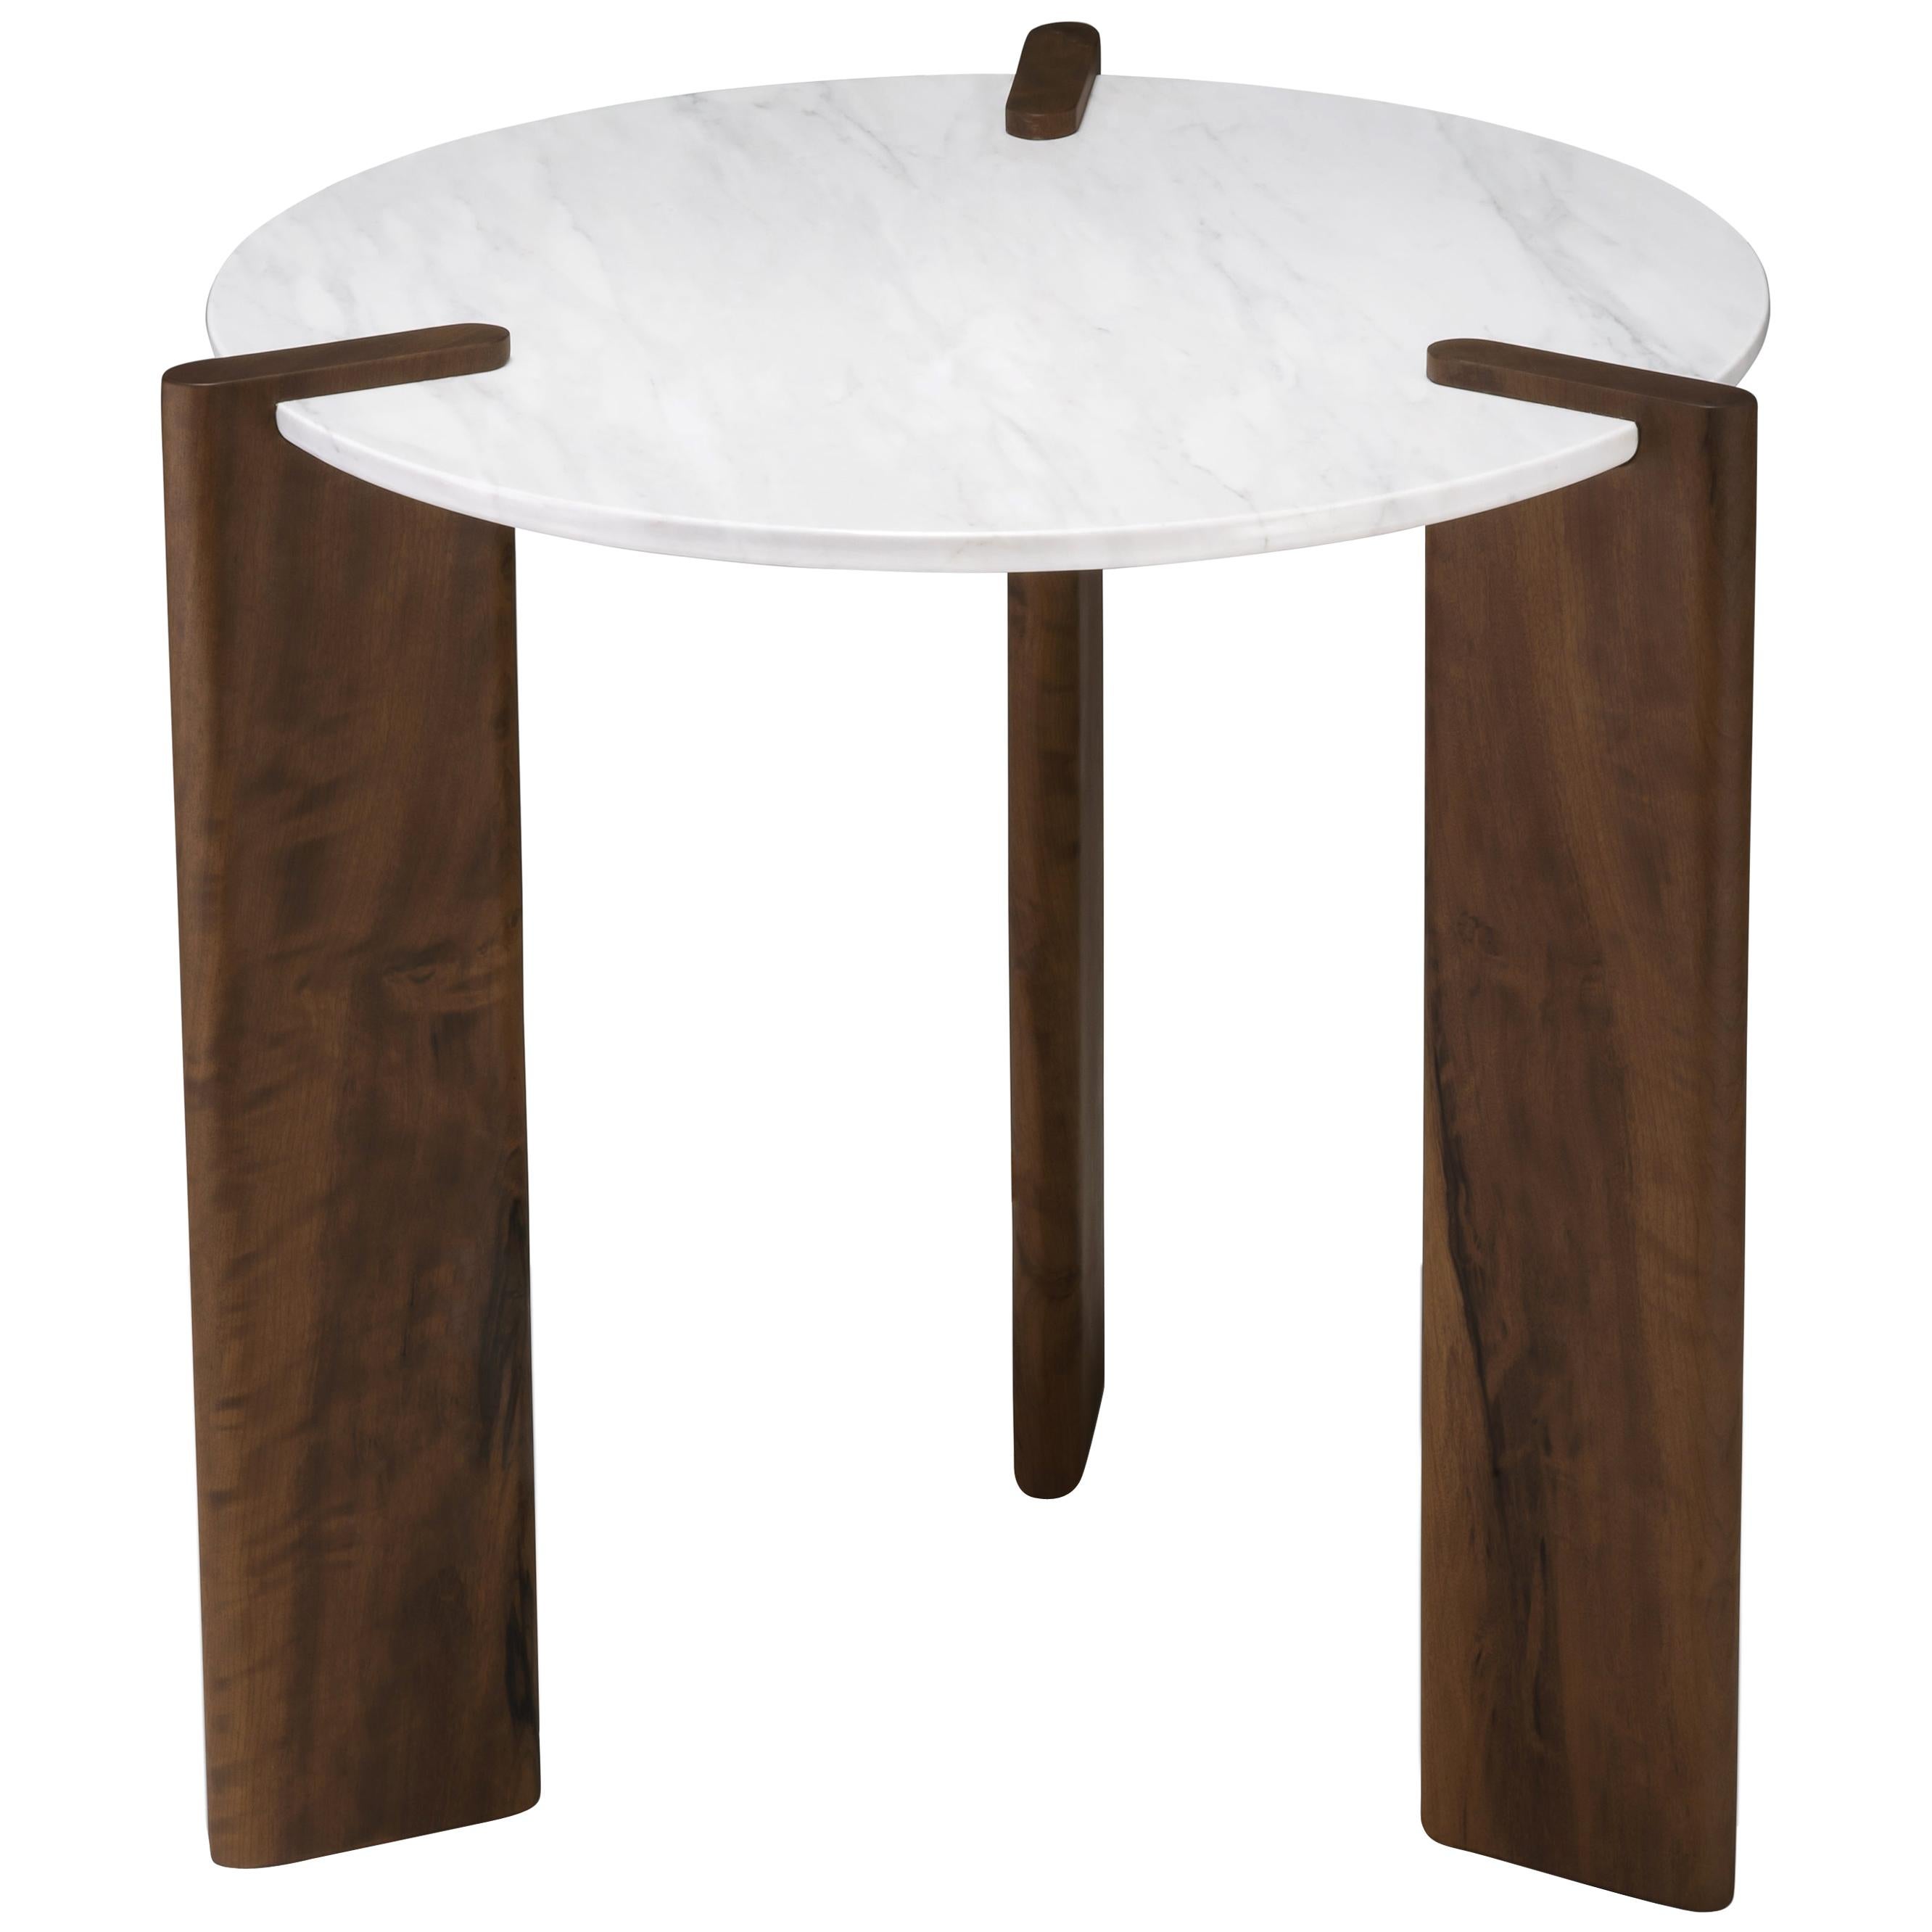 Side Table by Juliana Vasconcellos in Brazilian Solid Wood and Carrara Marble